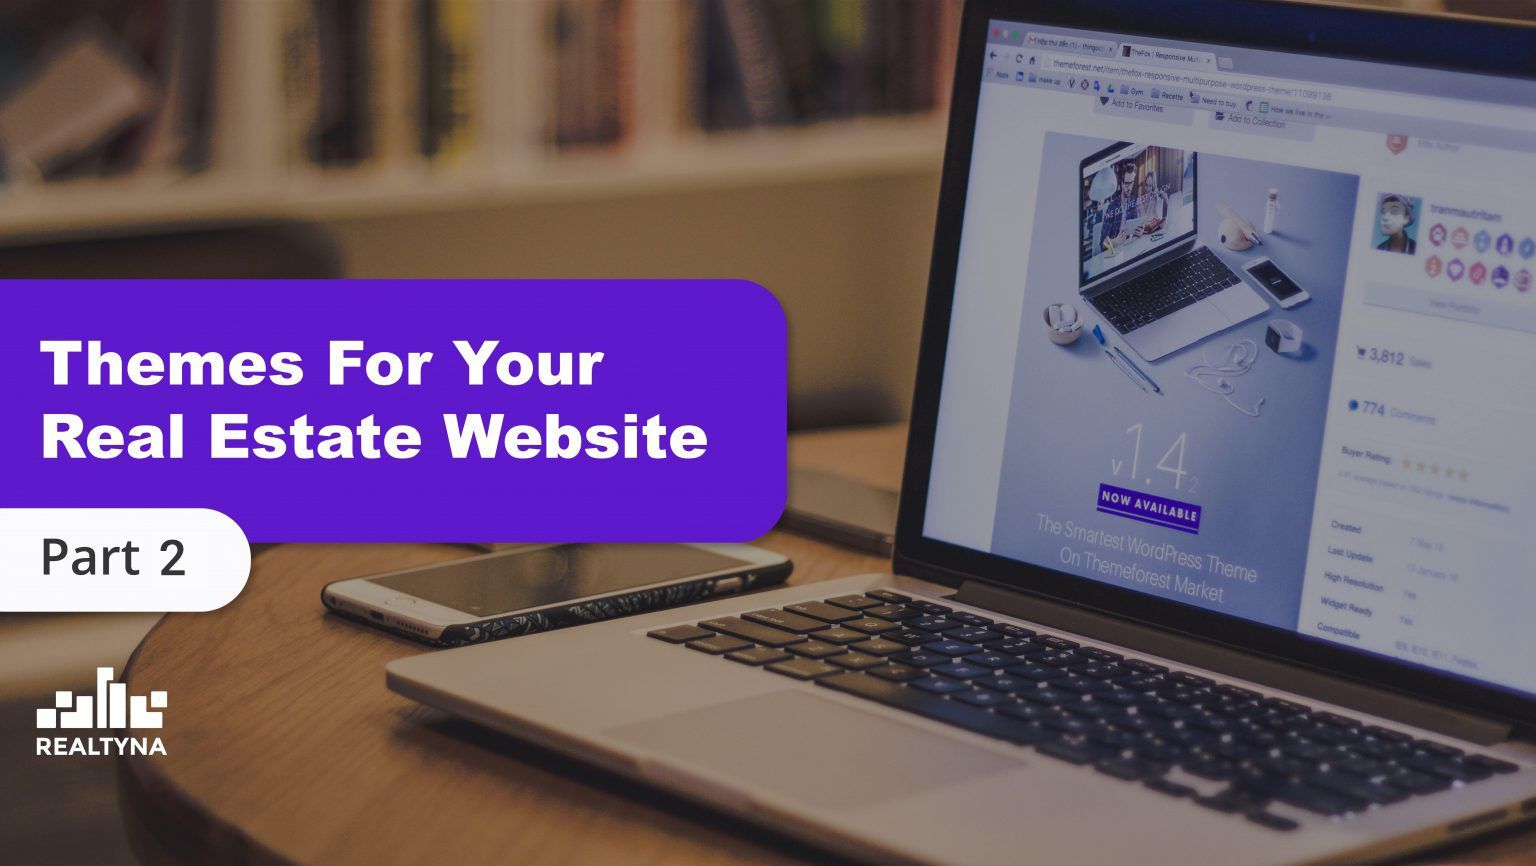 Themes for Your Real Estate Website (Part 2)